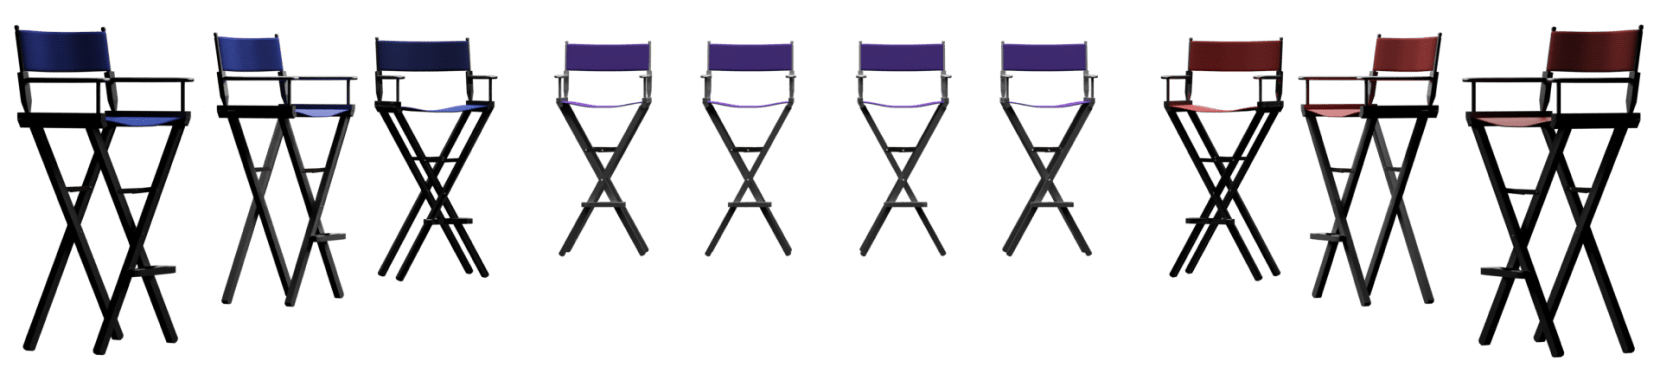 A row of purple directors chairs lined up in front of each other.